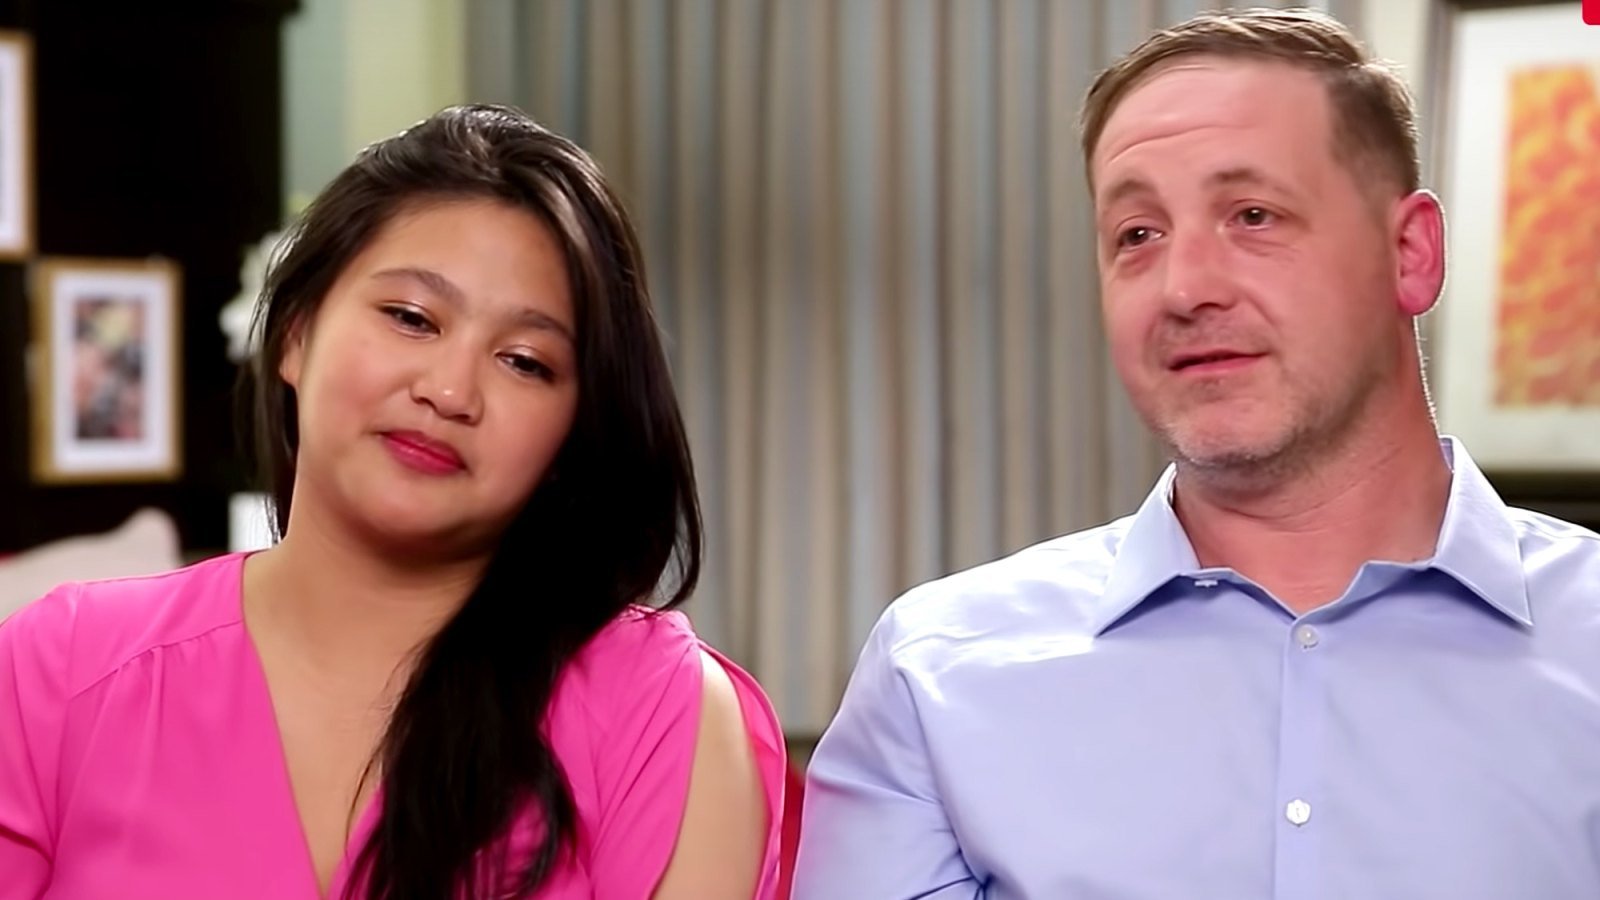 90 Day Fiancé stars Leida, in a pink top, and Eric, in a purple button-down shirt